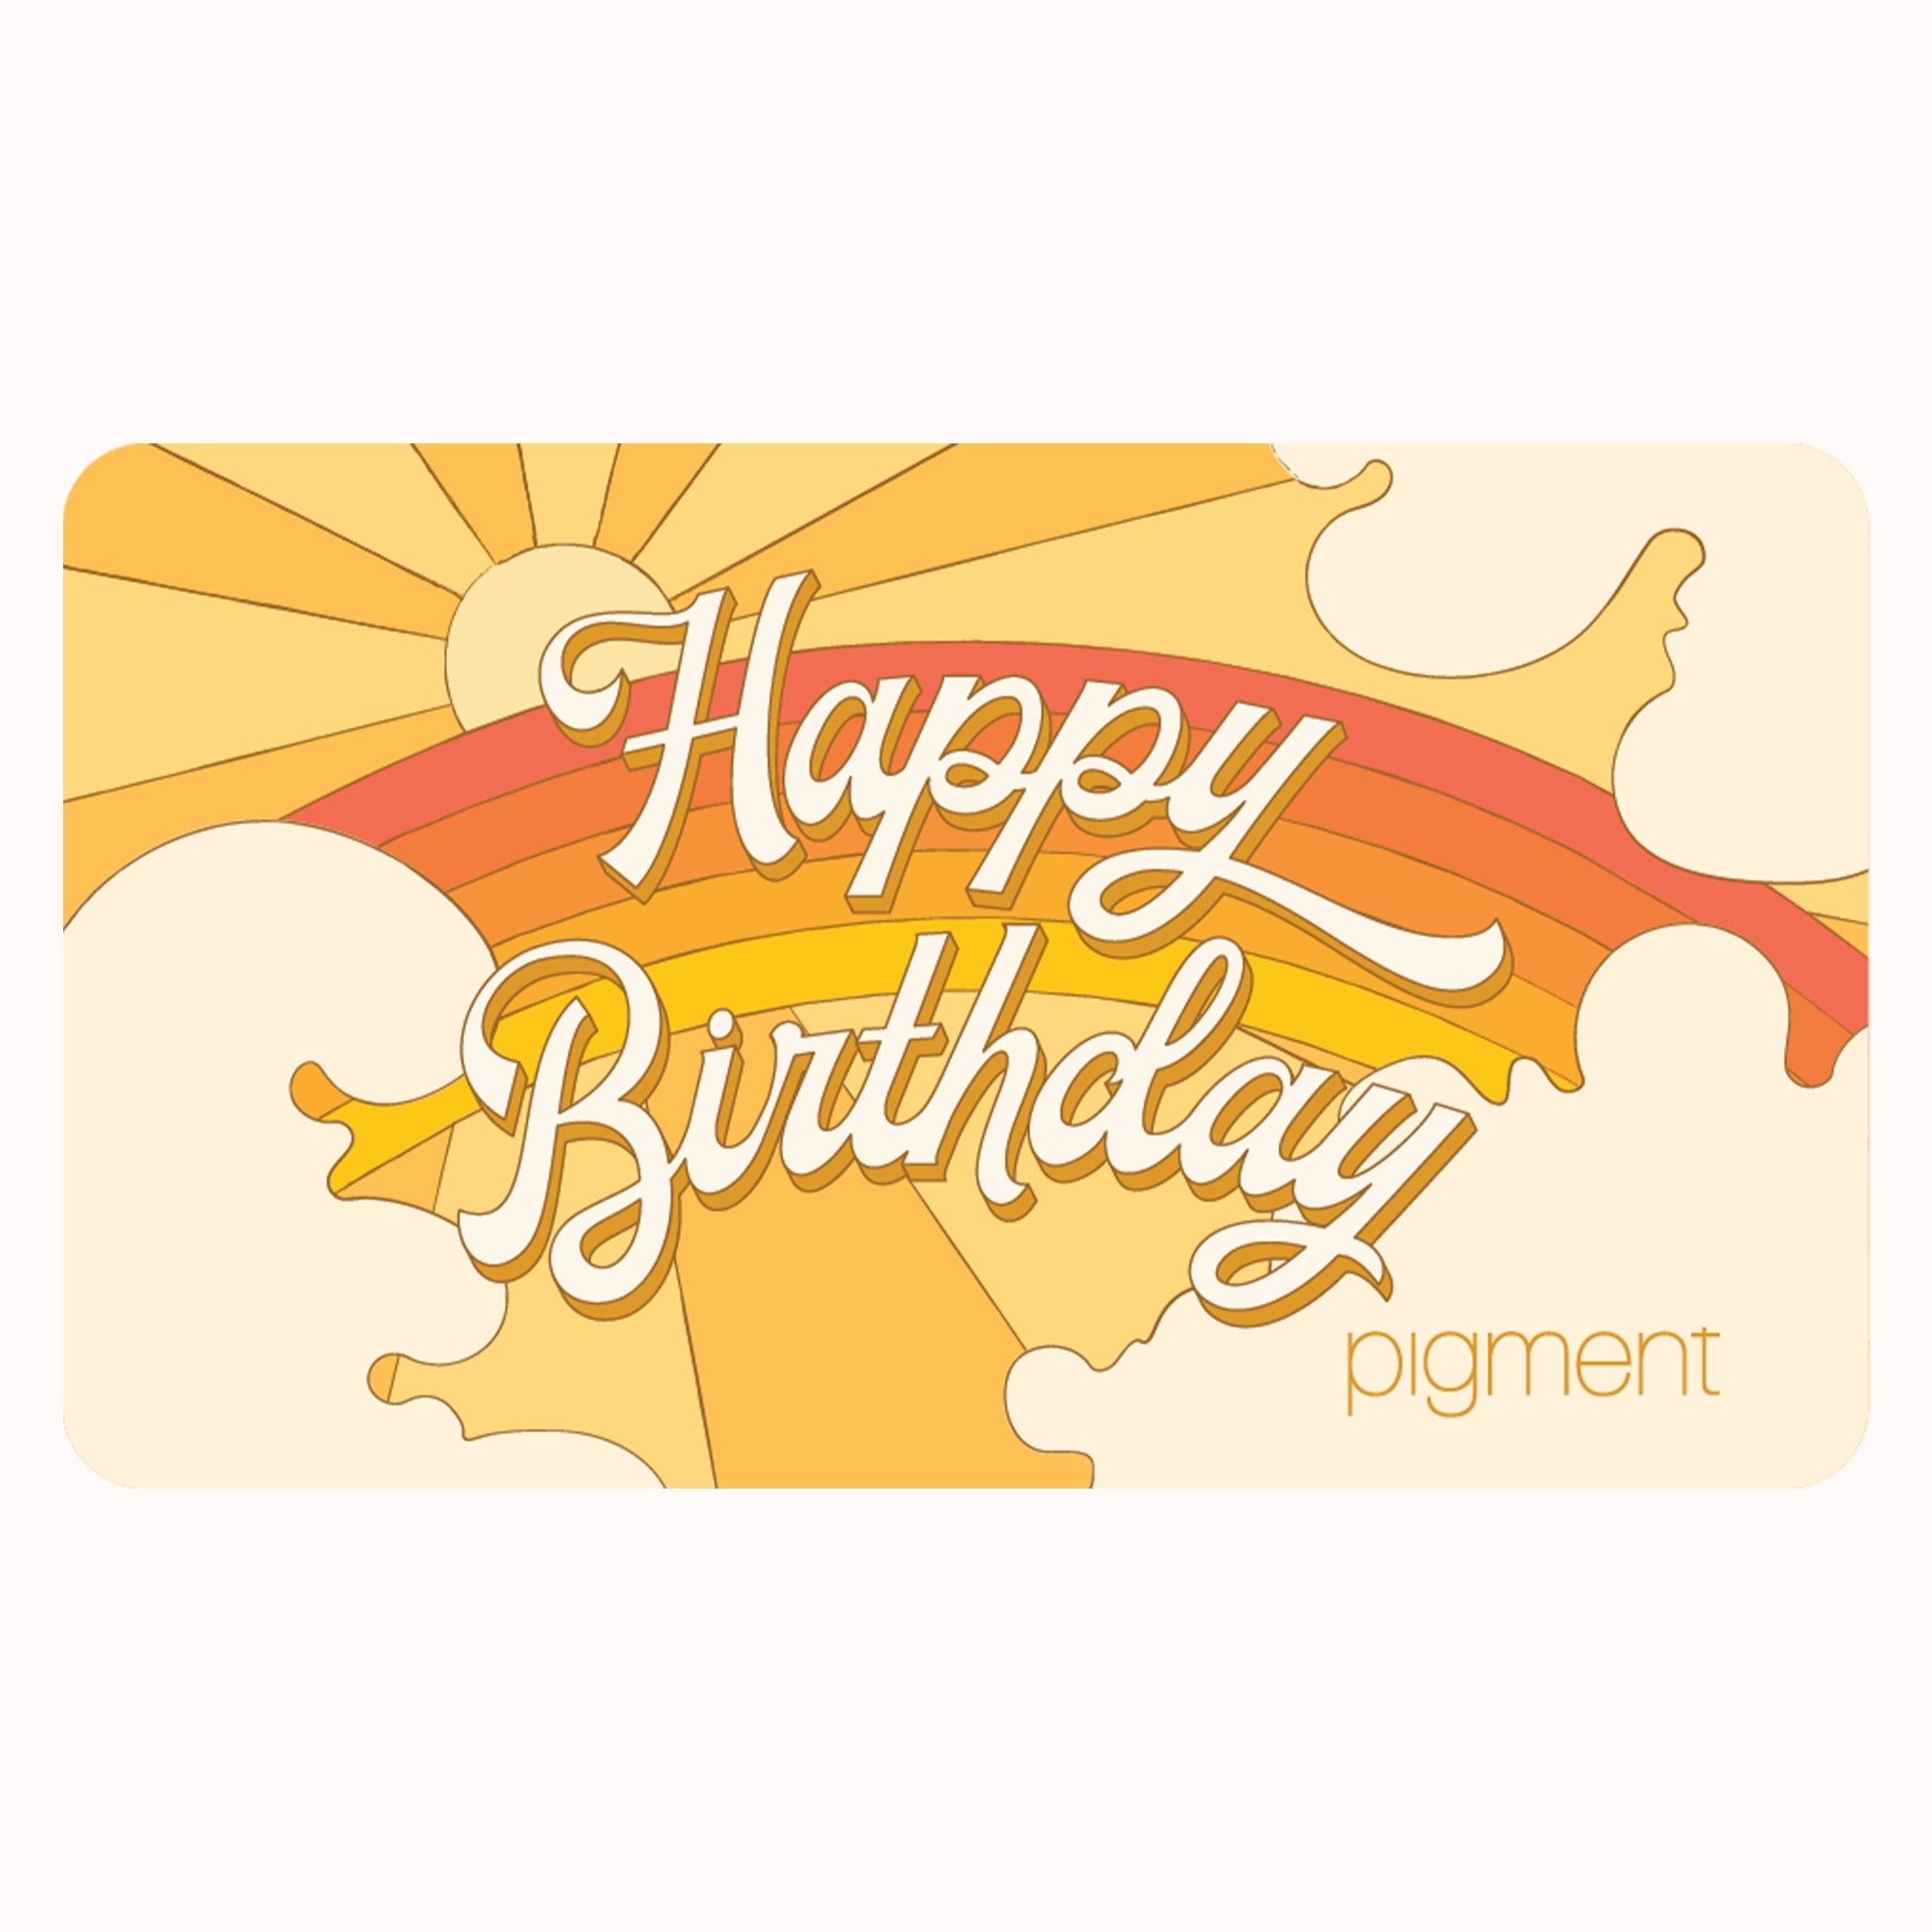 On a white background is an orange, yellow and red gift card with a rainbow and sky design along with ivory text across the front that reads, &quot;Happy Birthday&quot; and smaller text in the bottom right corner that reads, &quot;Pigment&quot;.